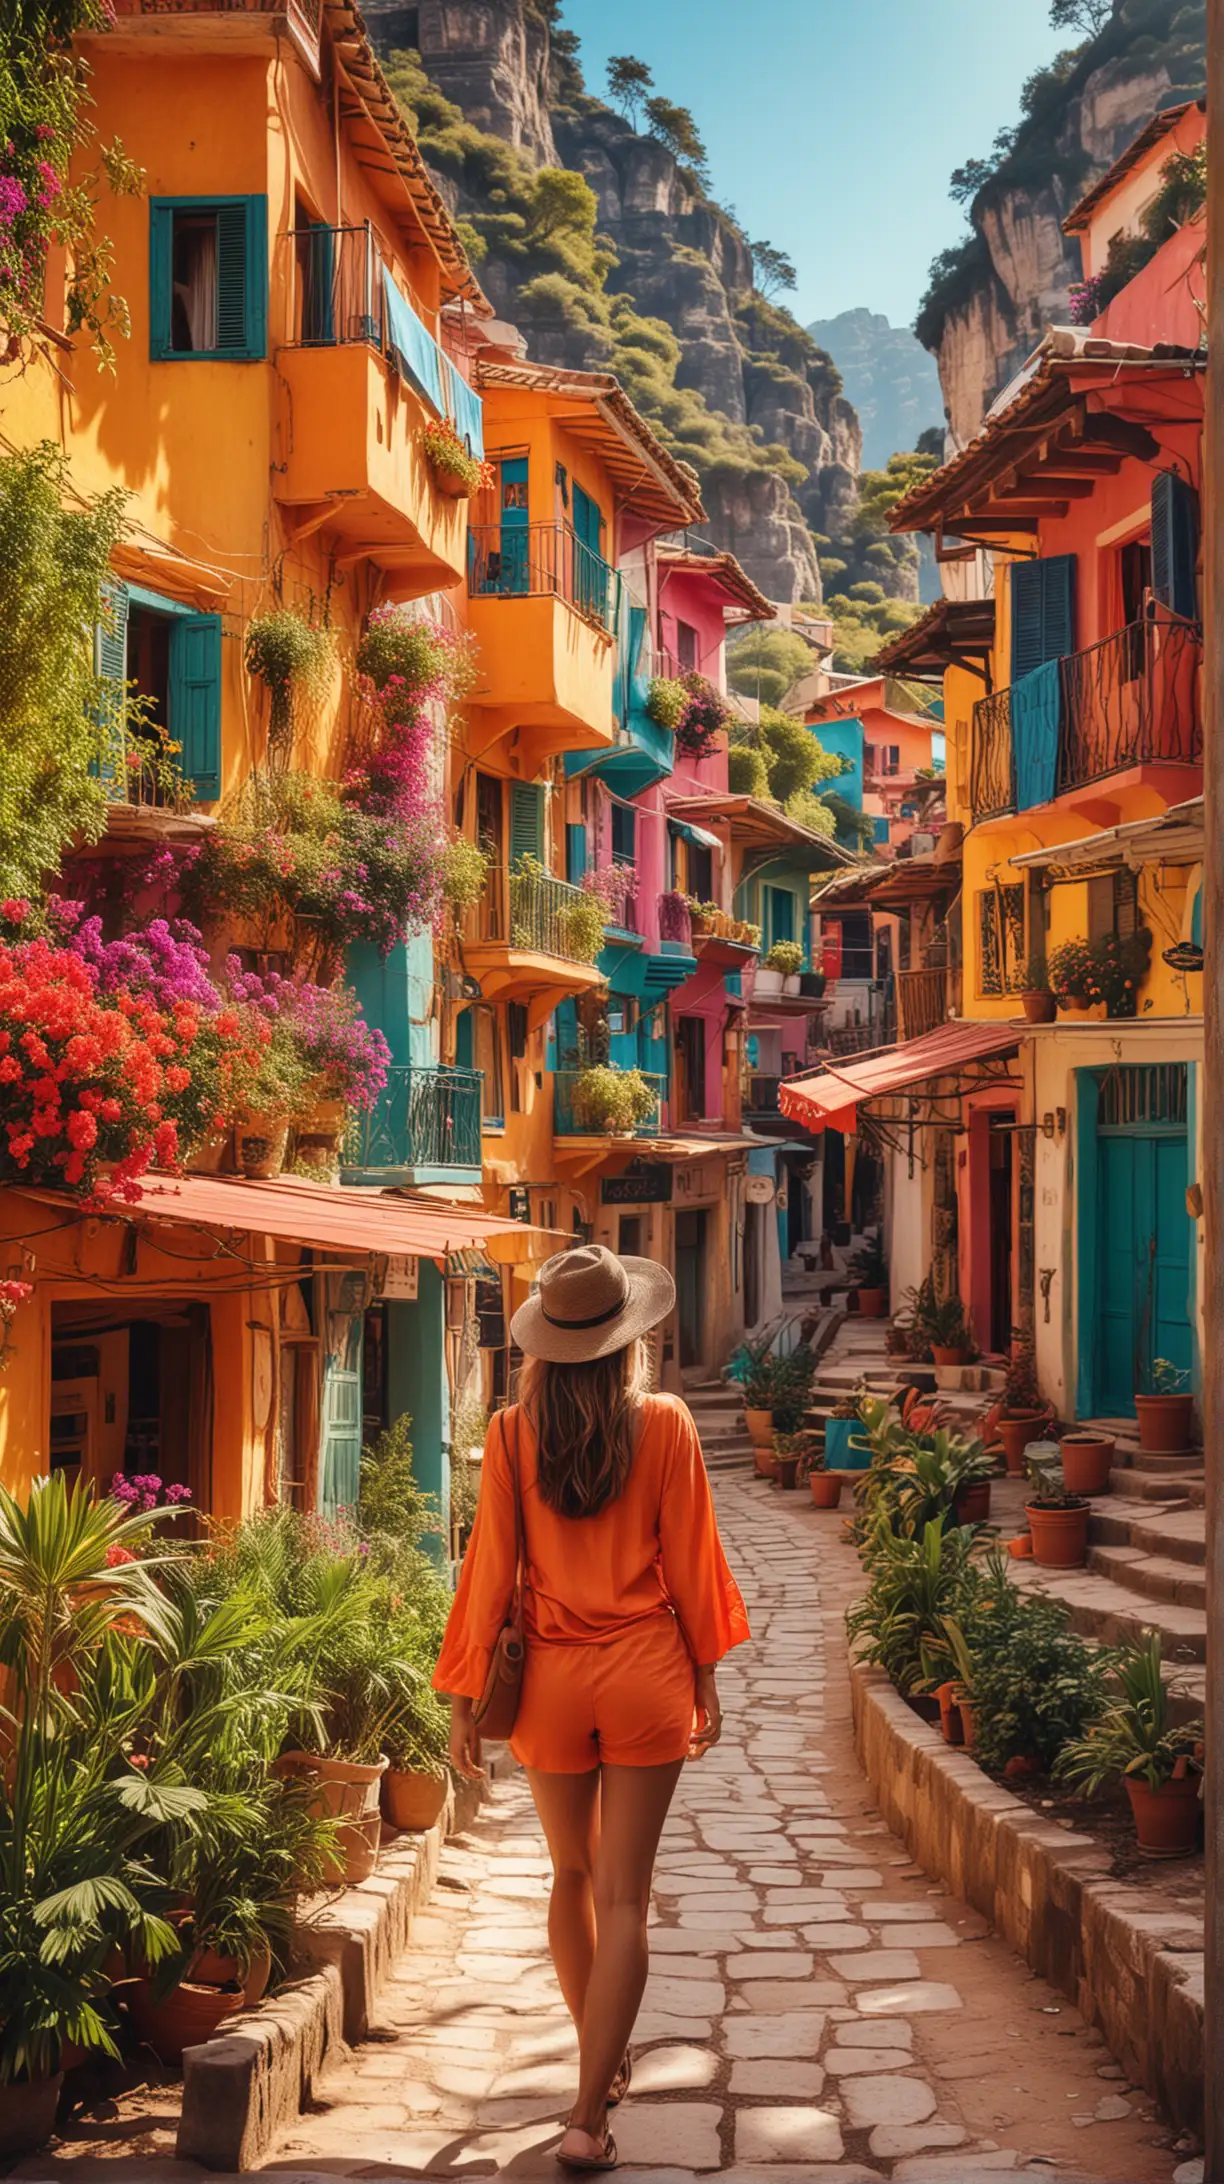 Traveling Girl Admiring Vibrant Scenery with Radiant Colors